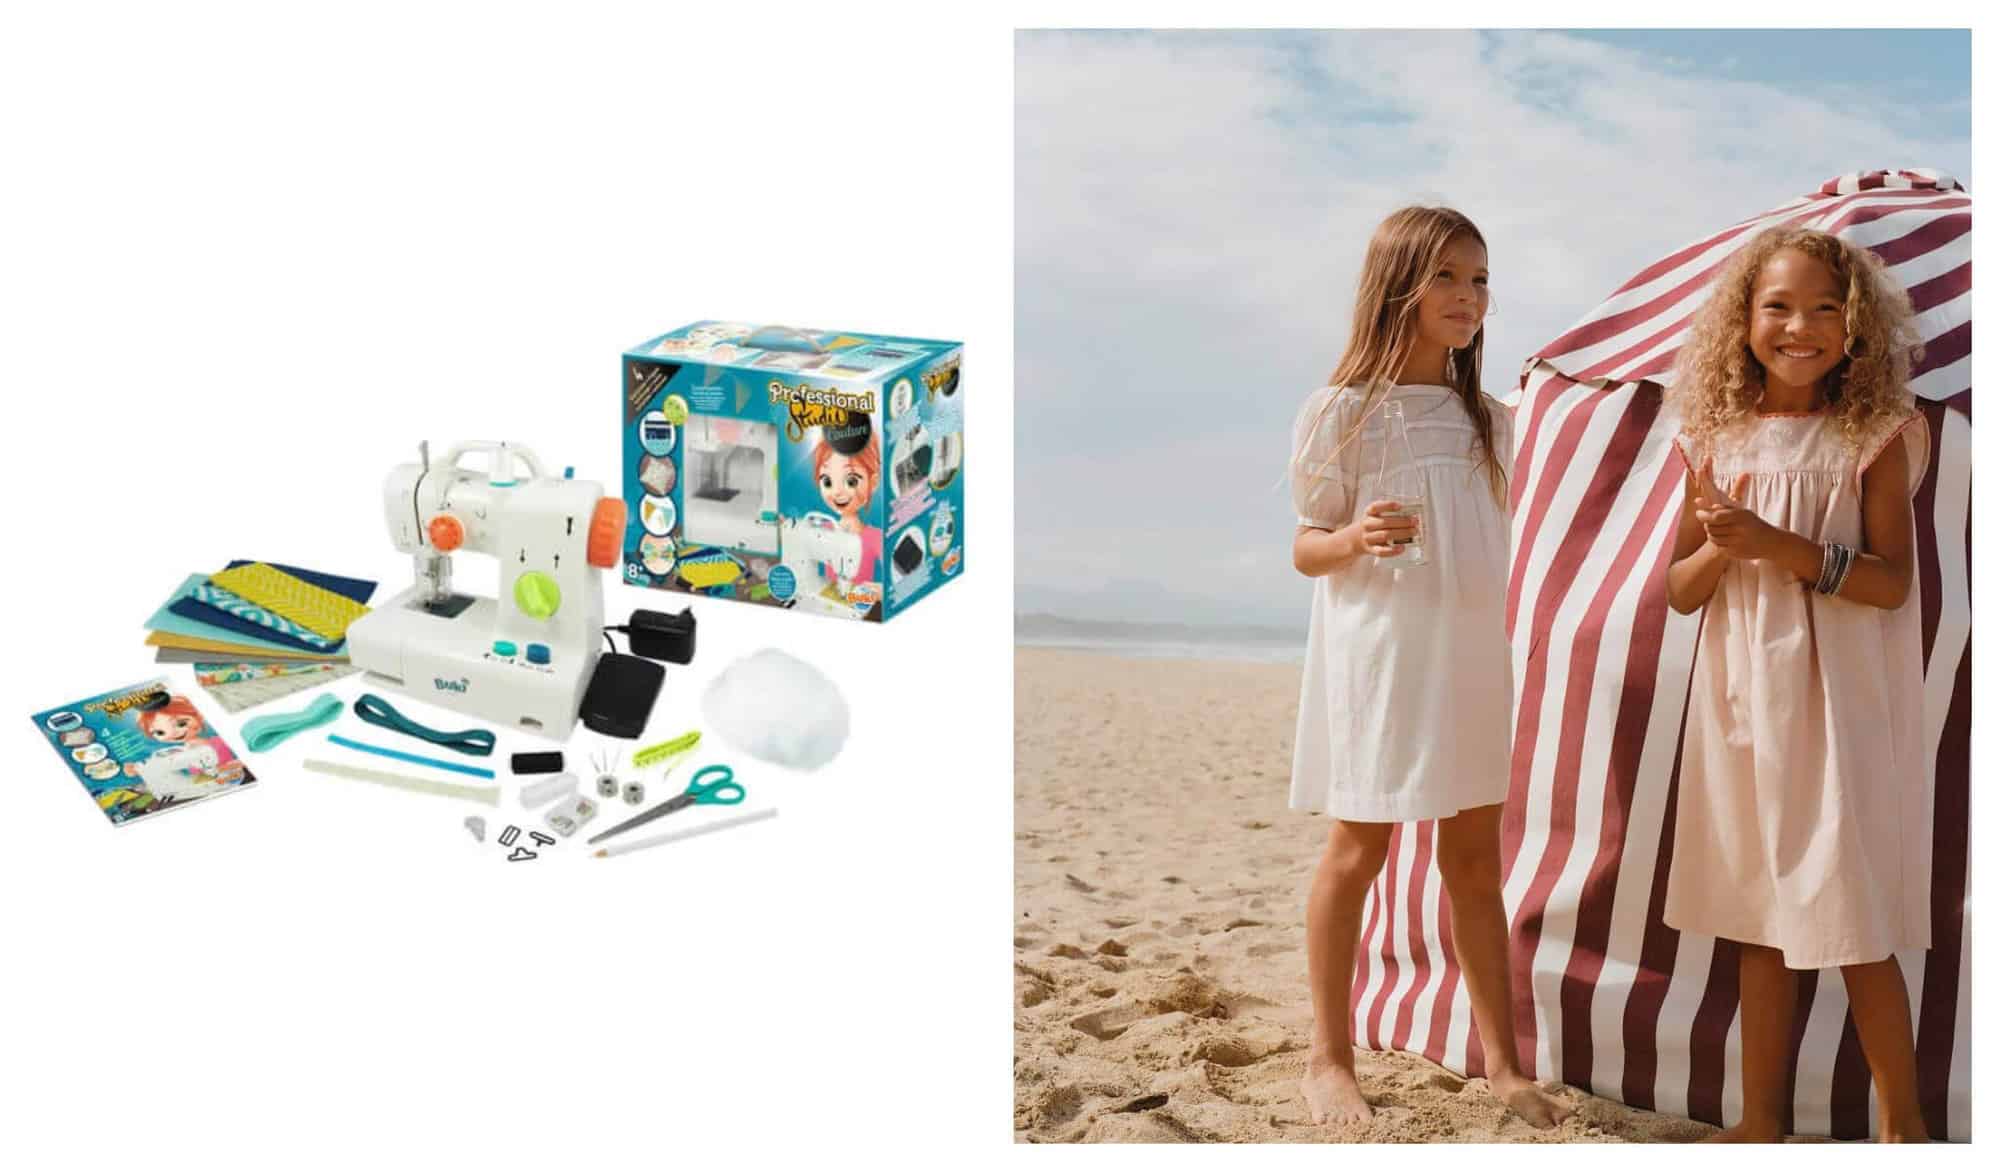 Left: A product picture of the Buki France sewing machine with its materials laid out. Right: Two young girls in white and cream dresses smile brightly at the beach in front of their red and white striped tent.